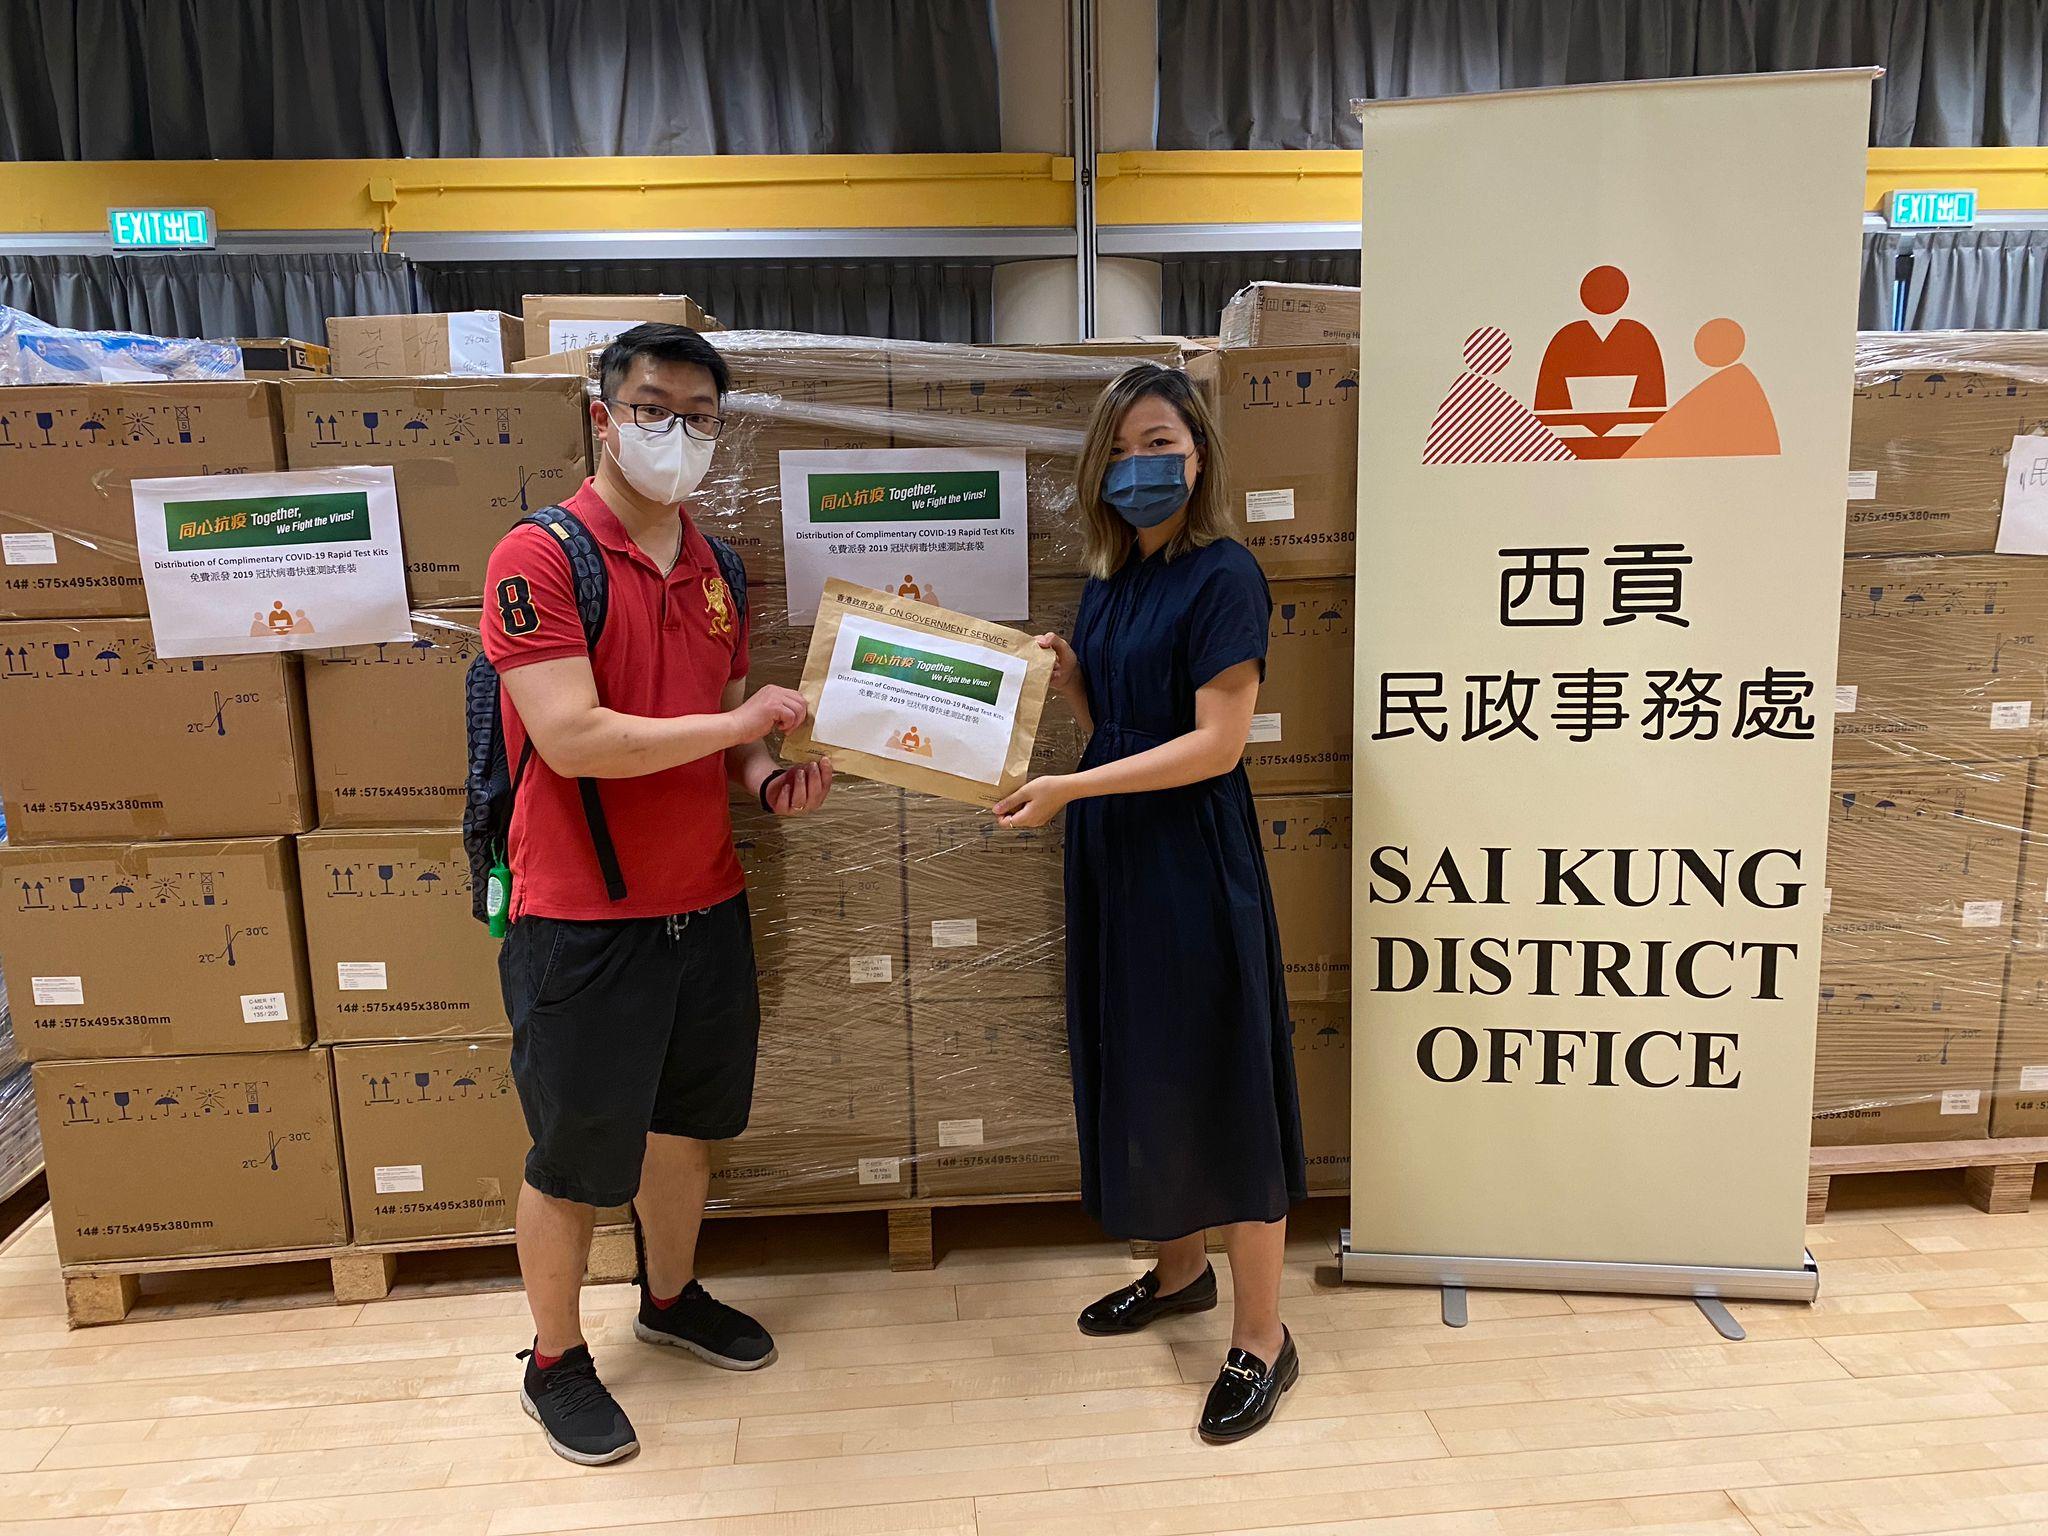 The Sai Kung District Office today (May 28) distributed COVID-19 rapid test kits to households, cleansing workers and property management staff living and working in The Capitol  for voluntary testing through the property management company.